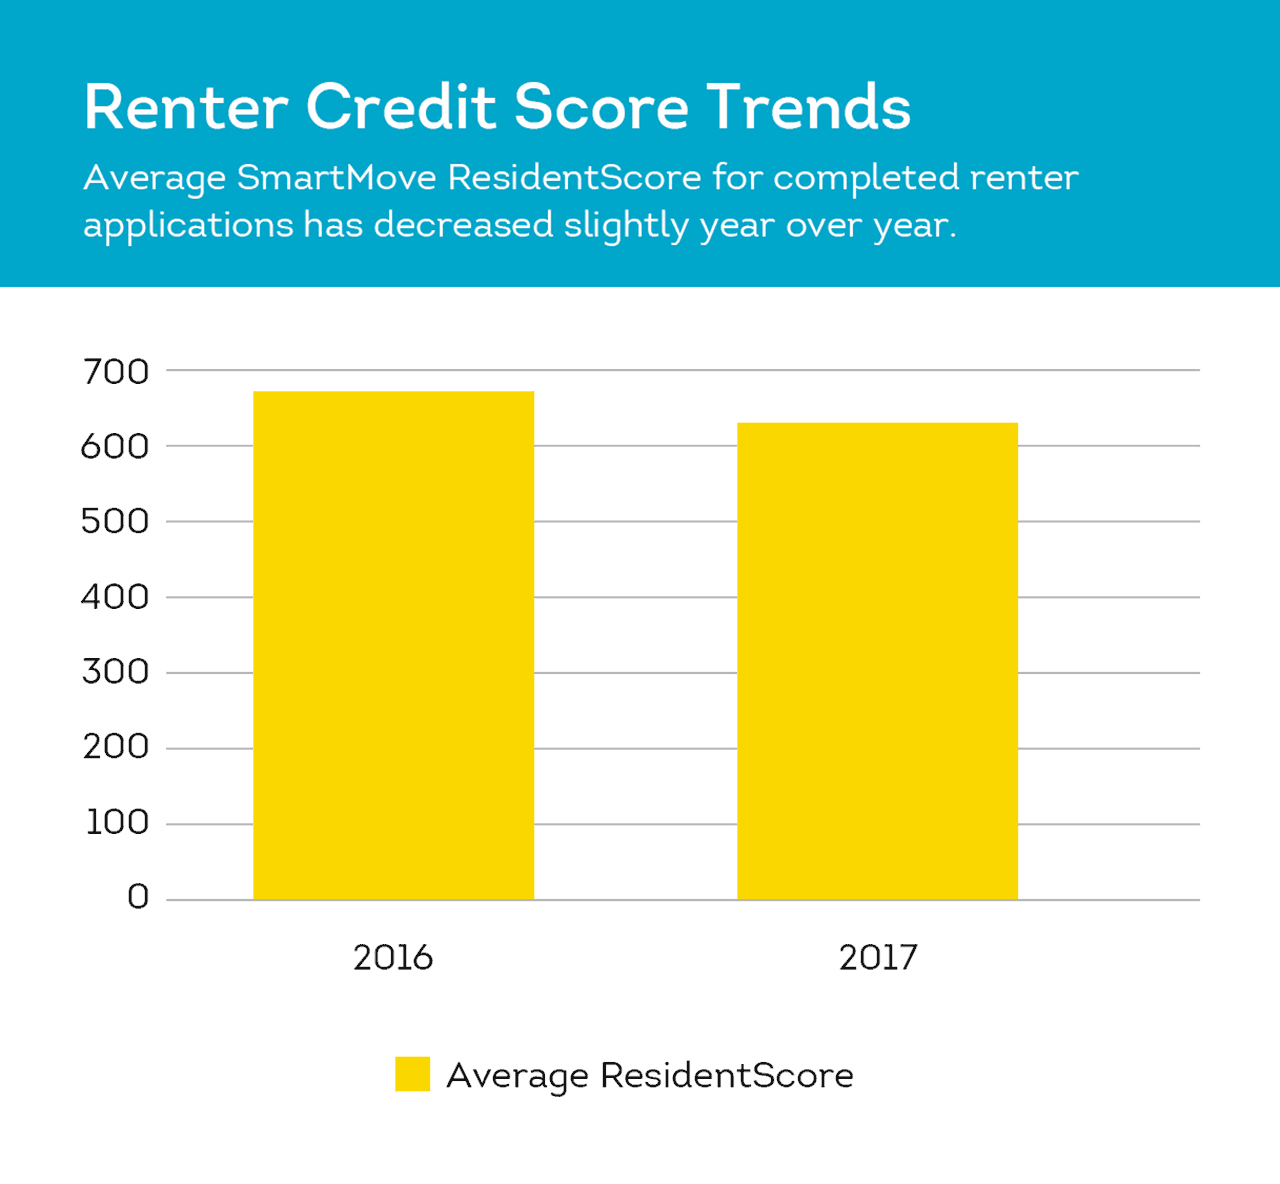 non-multifamily renter credit scores are slightly worse year over year